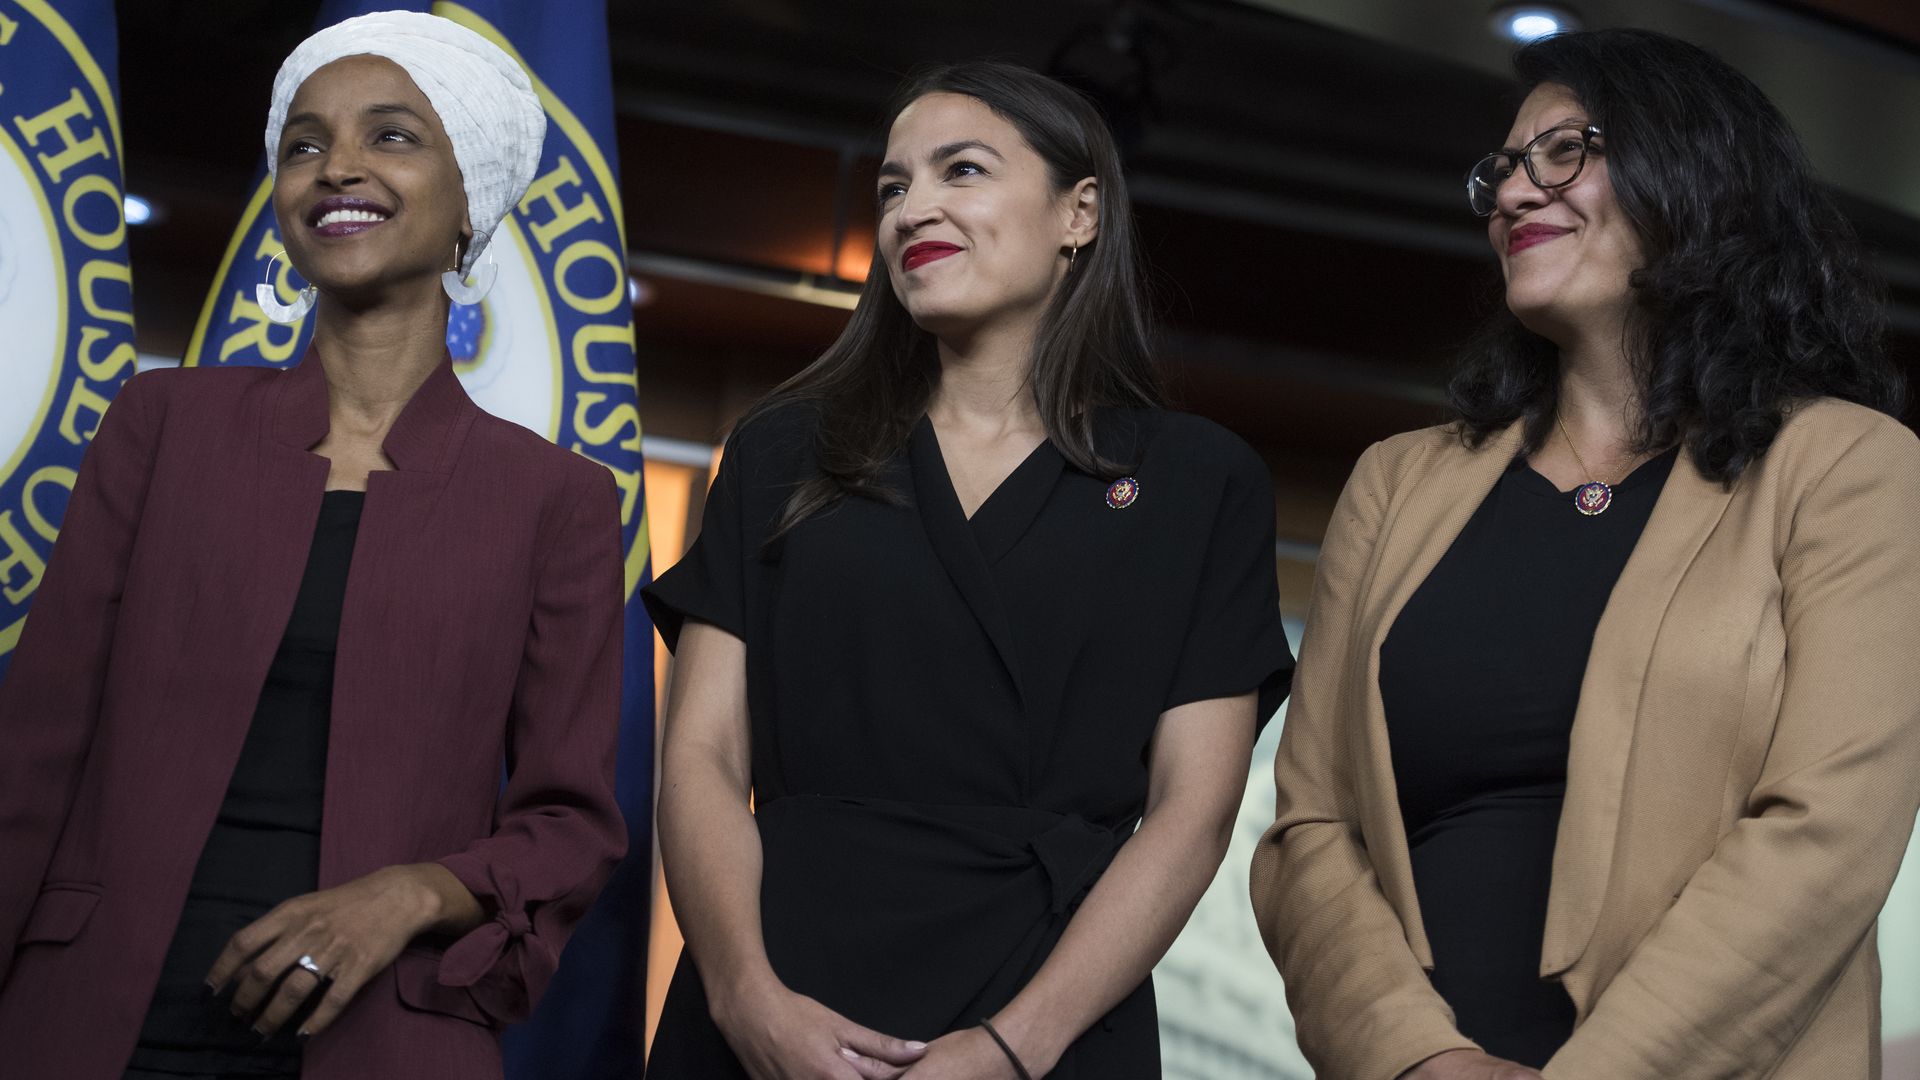 Reps. Ilhan Omar, D-Minn., Alexandria Ocasio-Cortez, D-N.Y., and Rashida Tlaib, D-Mich., conduct a news conference in the Capitol Visitor Center on Monday, July 15